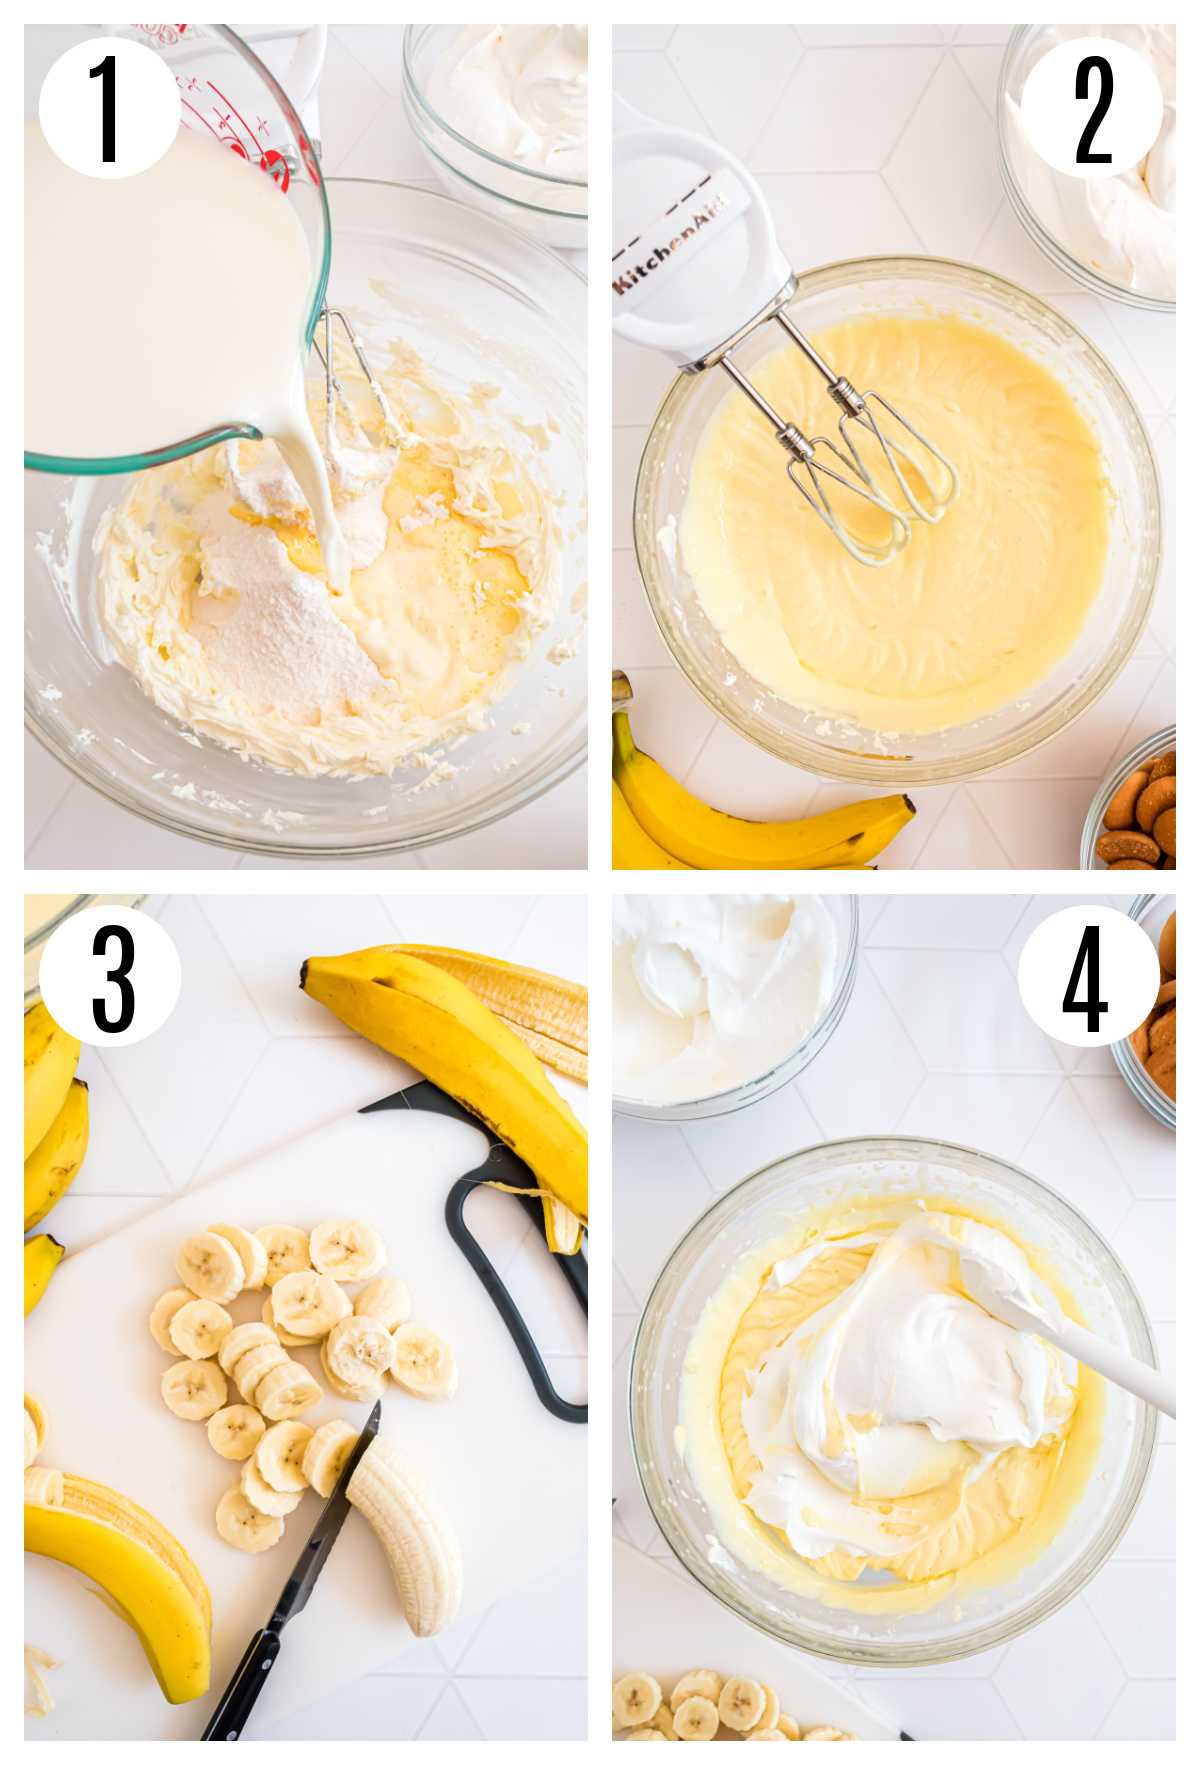 The first steps to making the banana pudding with cream cheese dessert include blending the cream cheese until smooth, adding the milk and pudding to the cream cheese, slicing the bananas and folidng the Cool Whip into the pudding mixture.